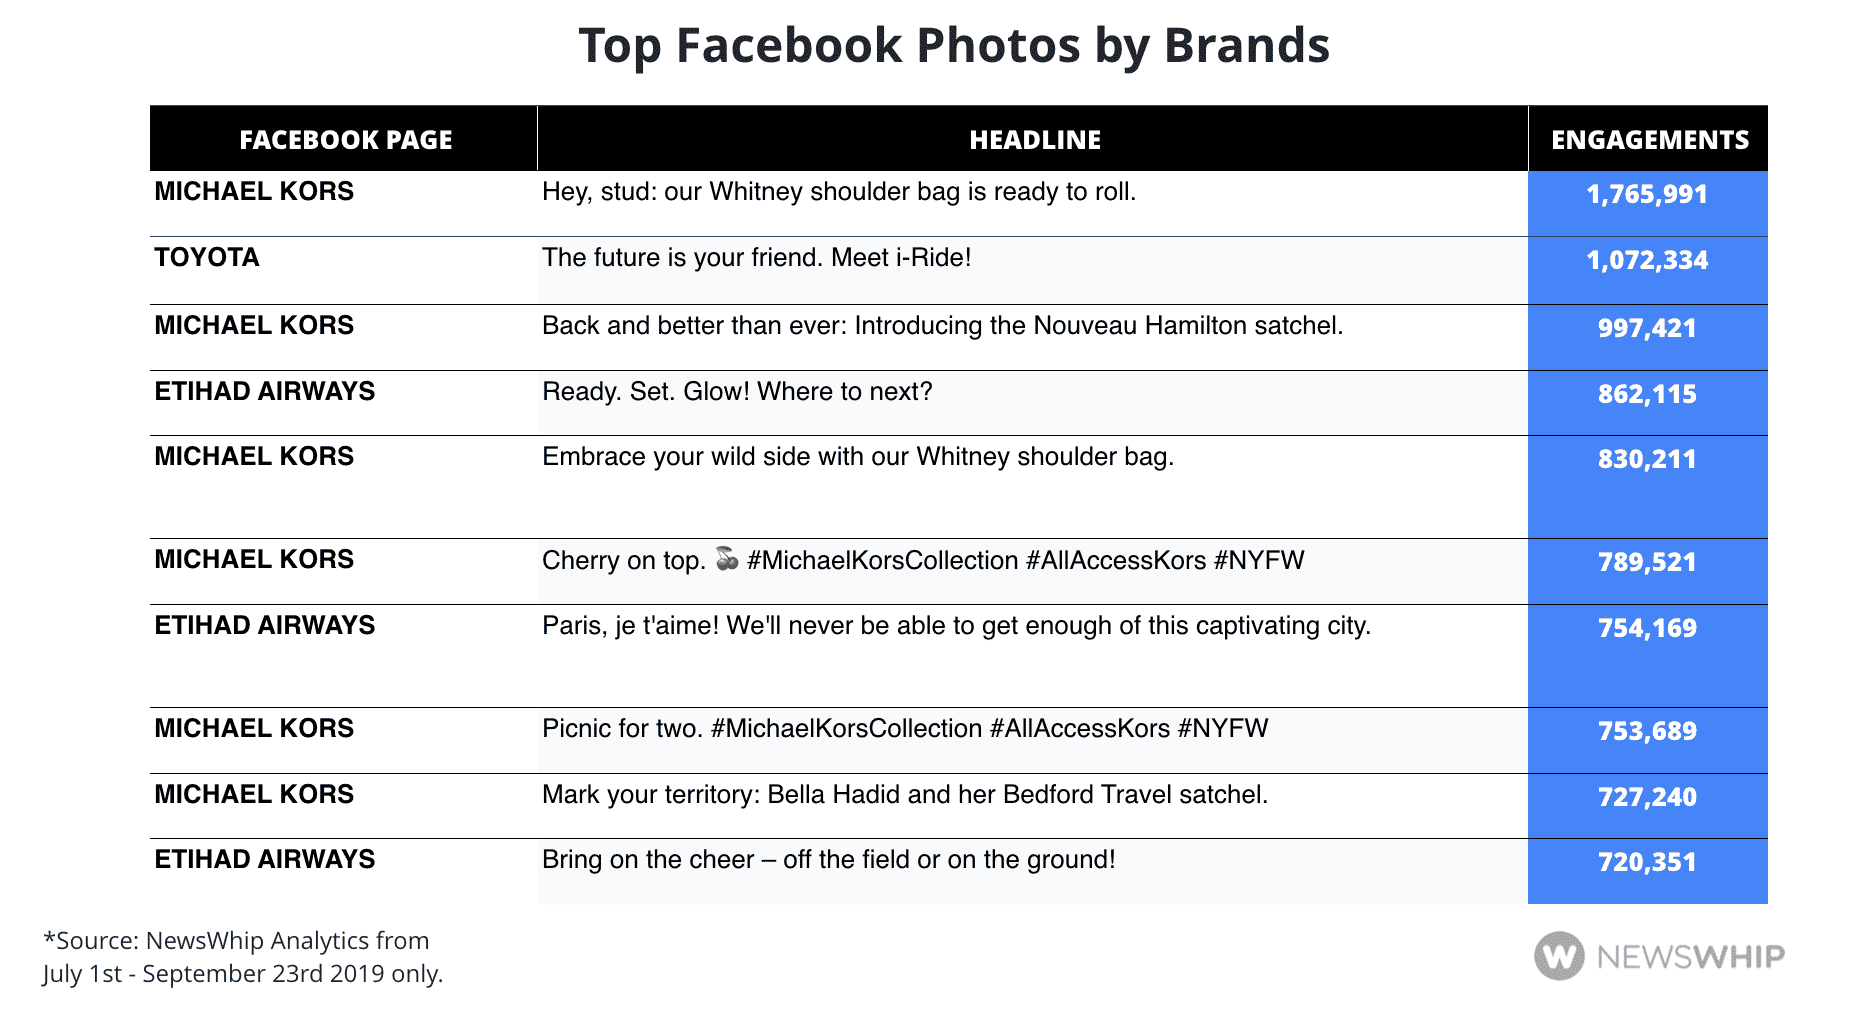 A table with the top ten Facebook photos posted by brands in Q3 2019, ordered by engagement